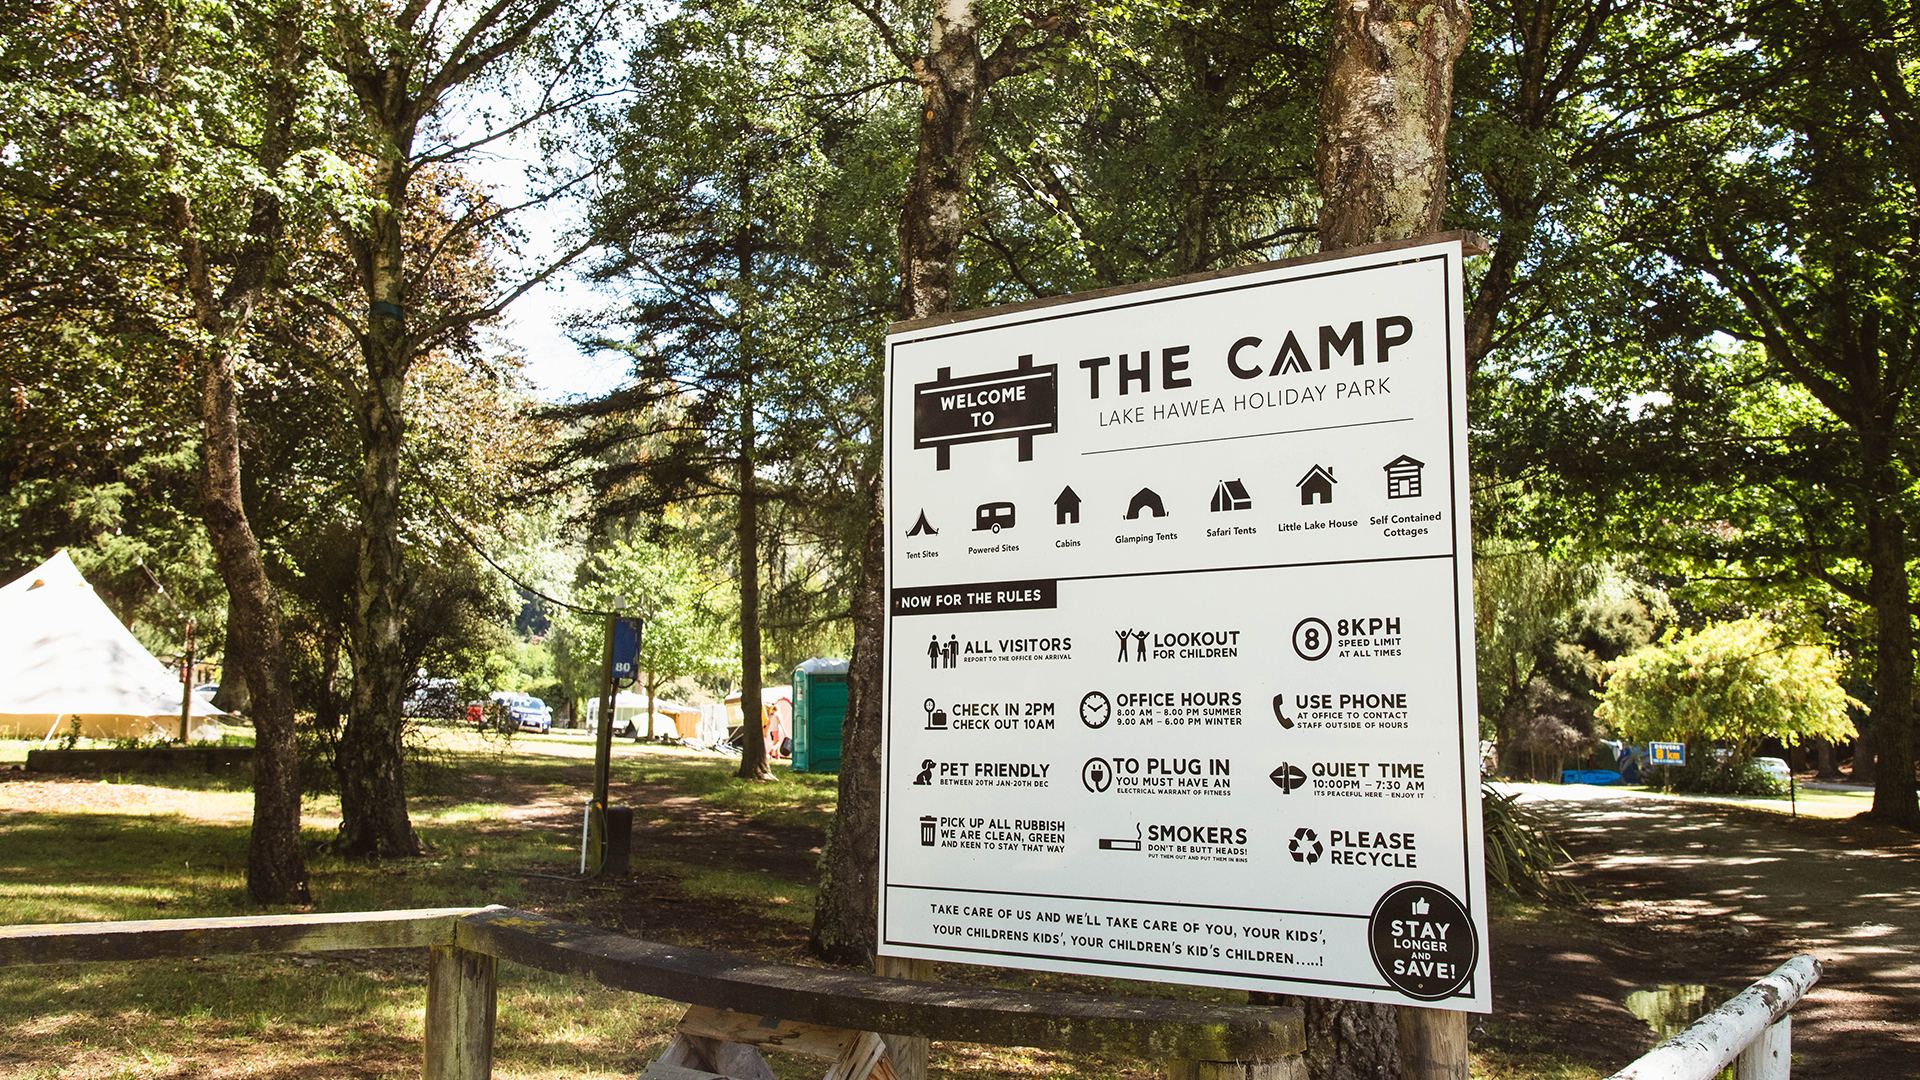 Sign at The Camp